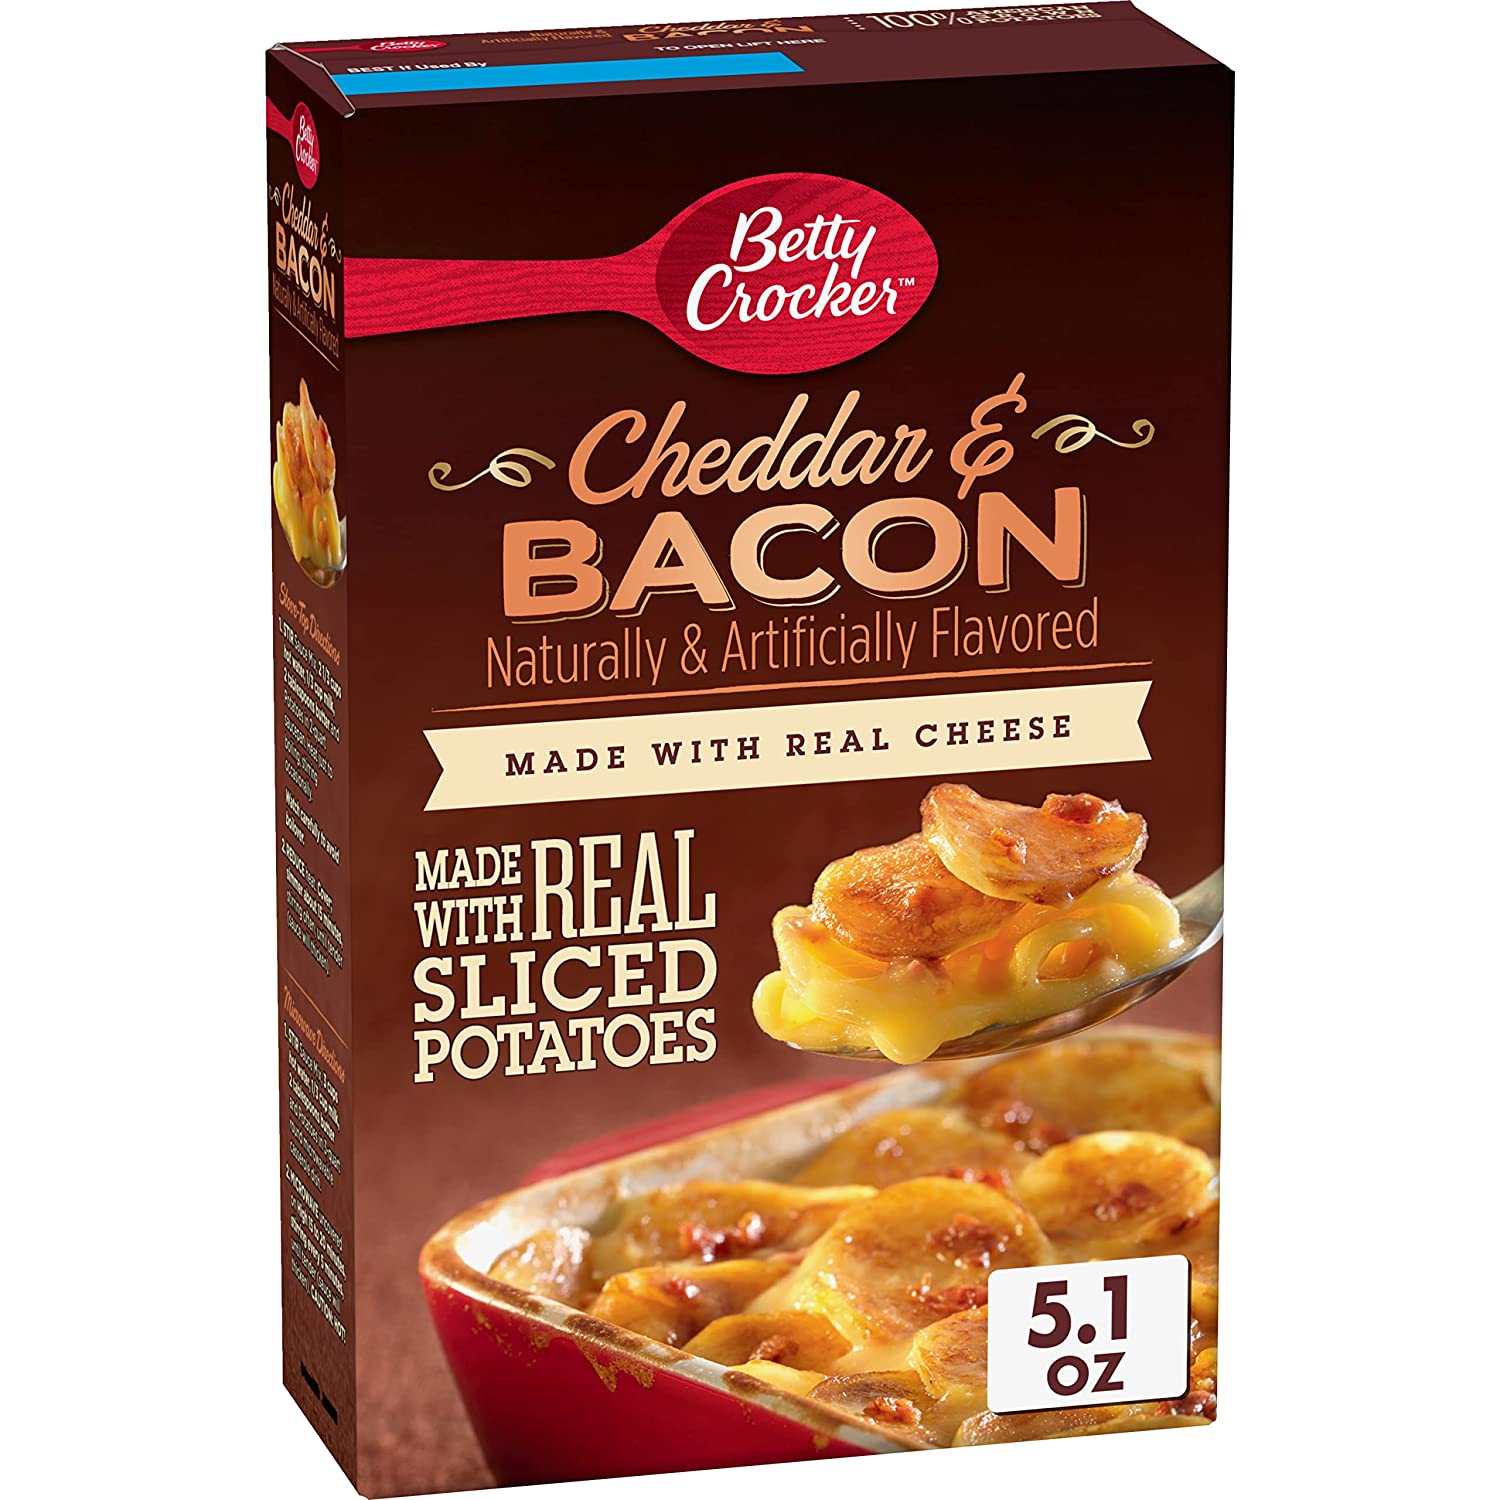 12-pack of 5.1oz Betty Crocker Cheddar and Bacon Potatoes $15 at Amazon